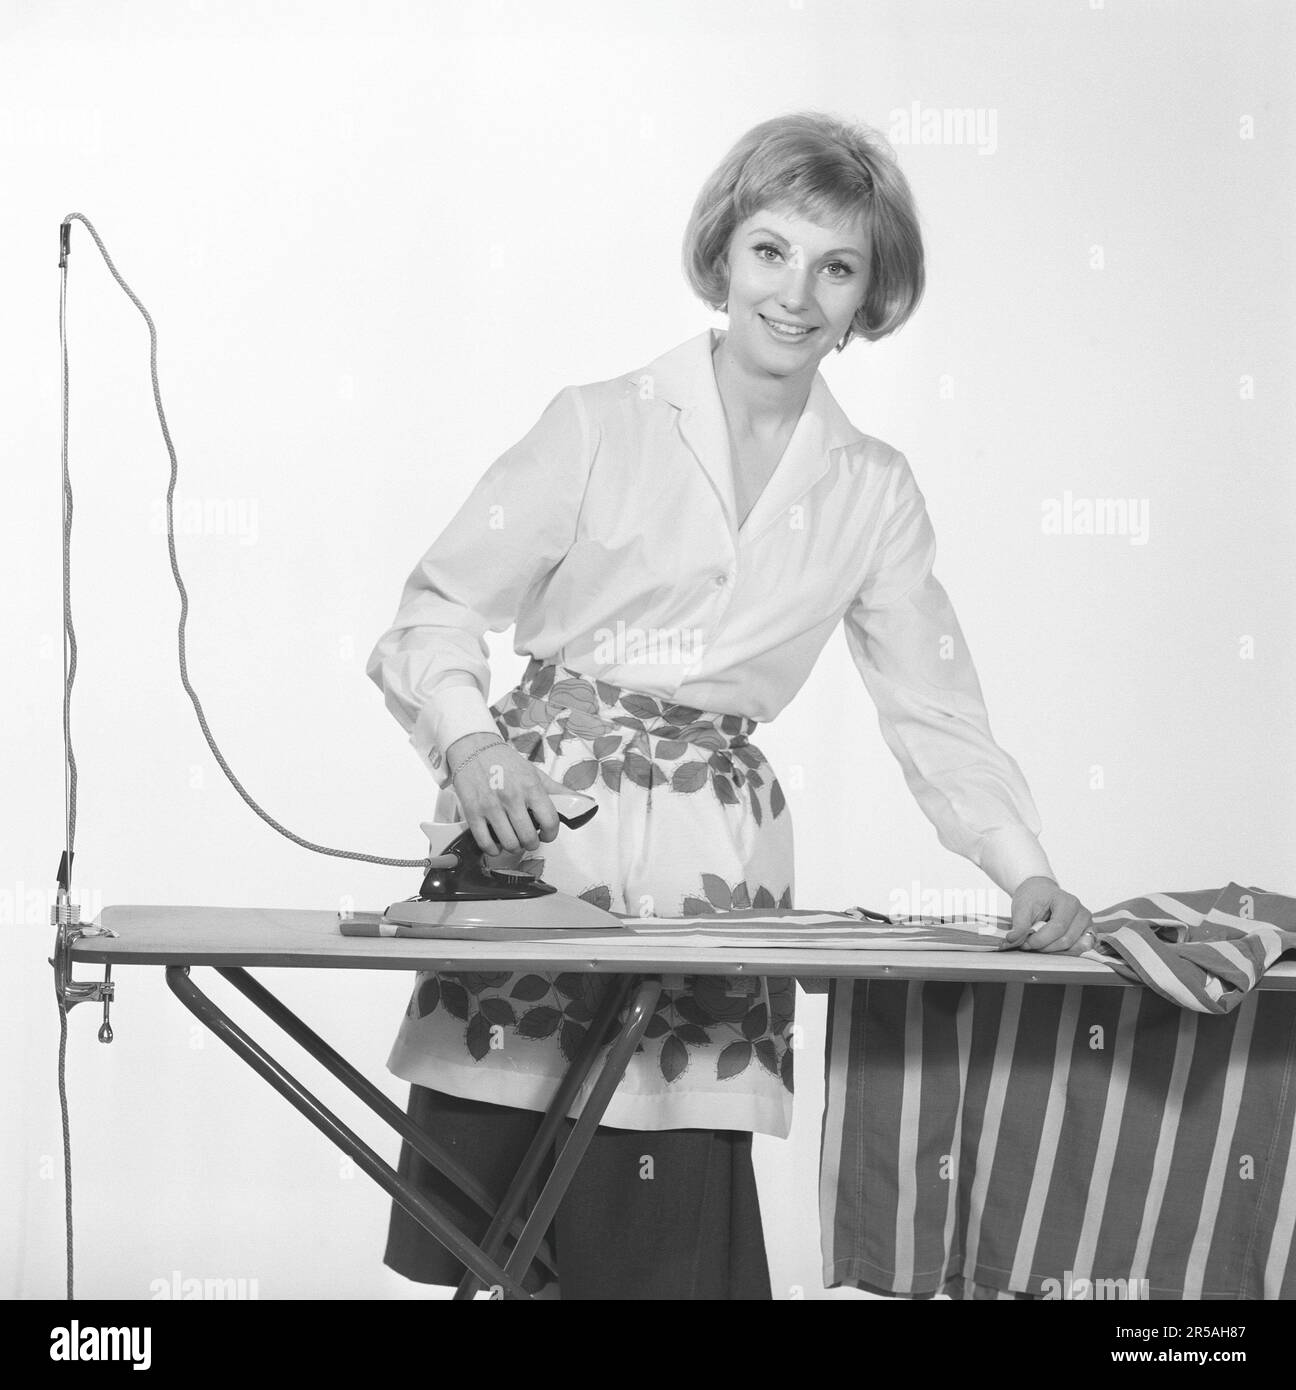 Ironing in the 1960s. A woman seen ironing curtains, smiling at the camera in the photographers studio. Sweden 1965. Conard ref 1743 Stock Photo